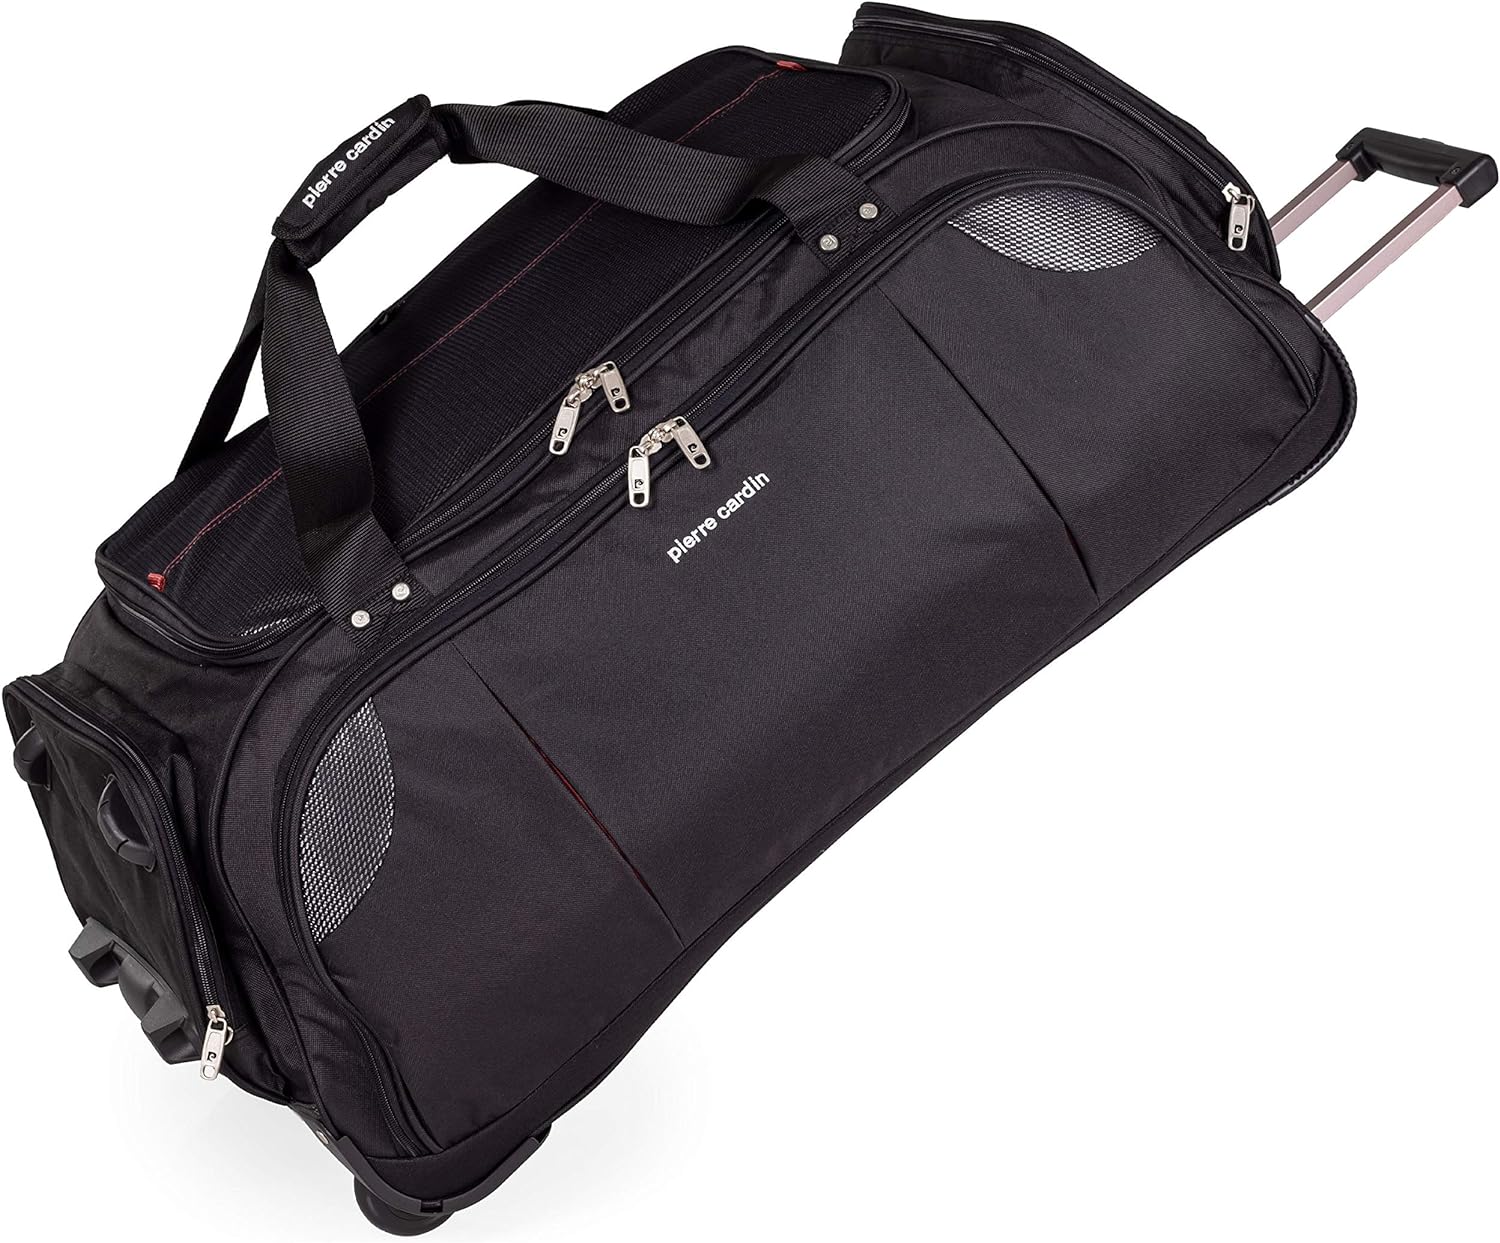 Lightweight Large Roller Bag Holdall by Pierre Cardin | Durable Stress Tested Skate Wheels | 95L Capacity | Trolley & Grab Carry Options | Travel Wheeled Duffle Bag CL769 ( 30")